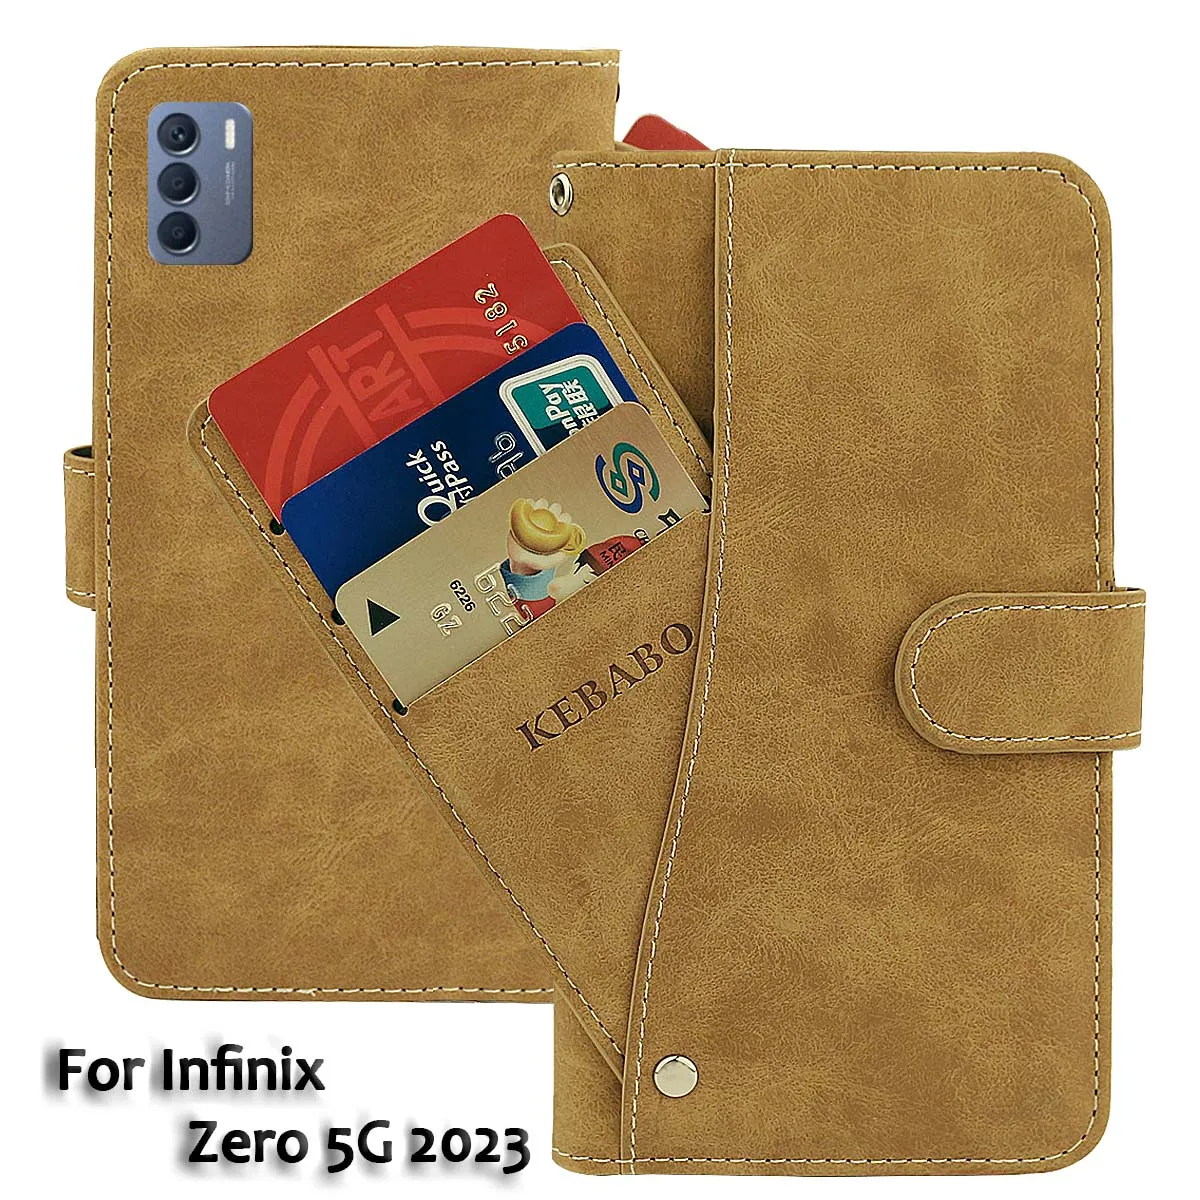 

Vintage Leather Wallet Infinix Zero 5G 2023 Case 6.78" Flip Luxury Card Slots Cover Magnet Phone Protective Cases Bags